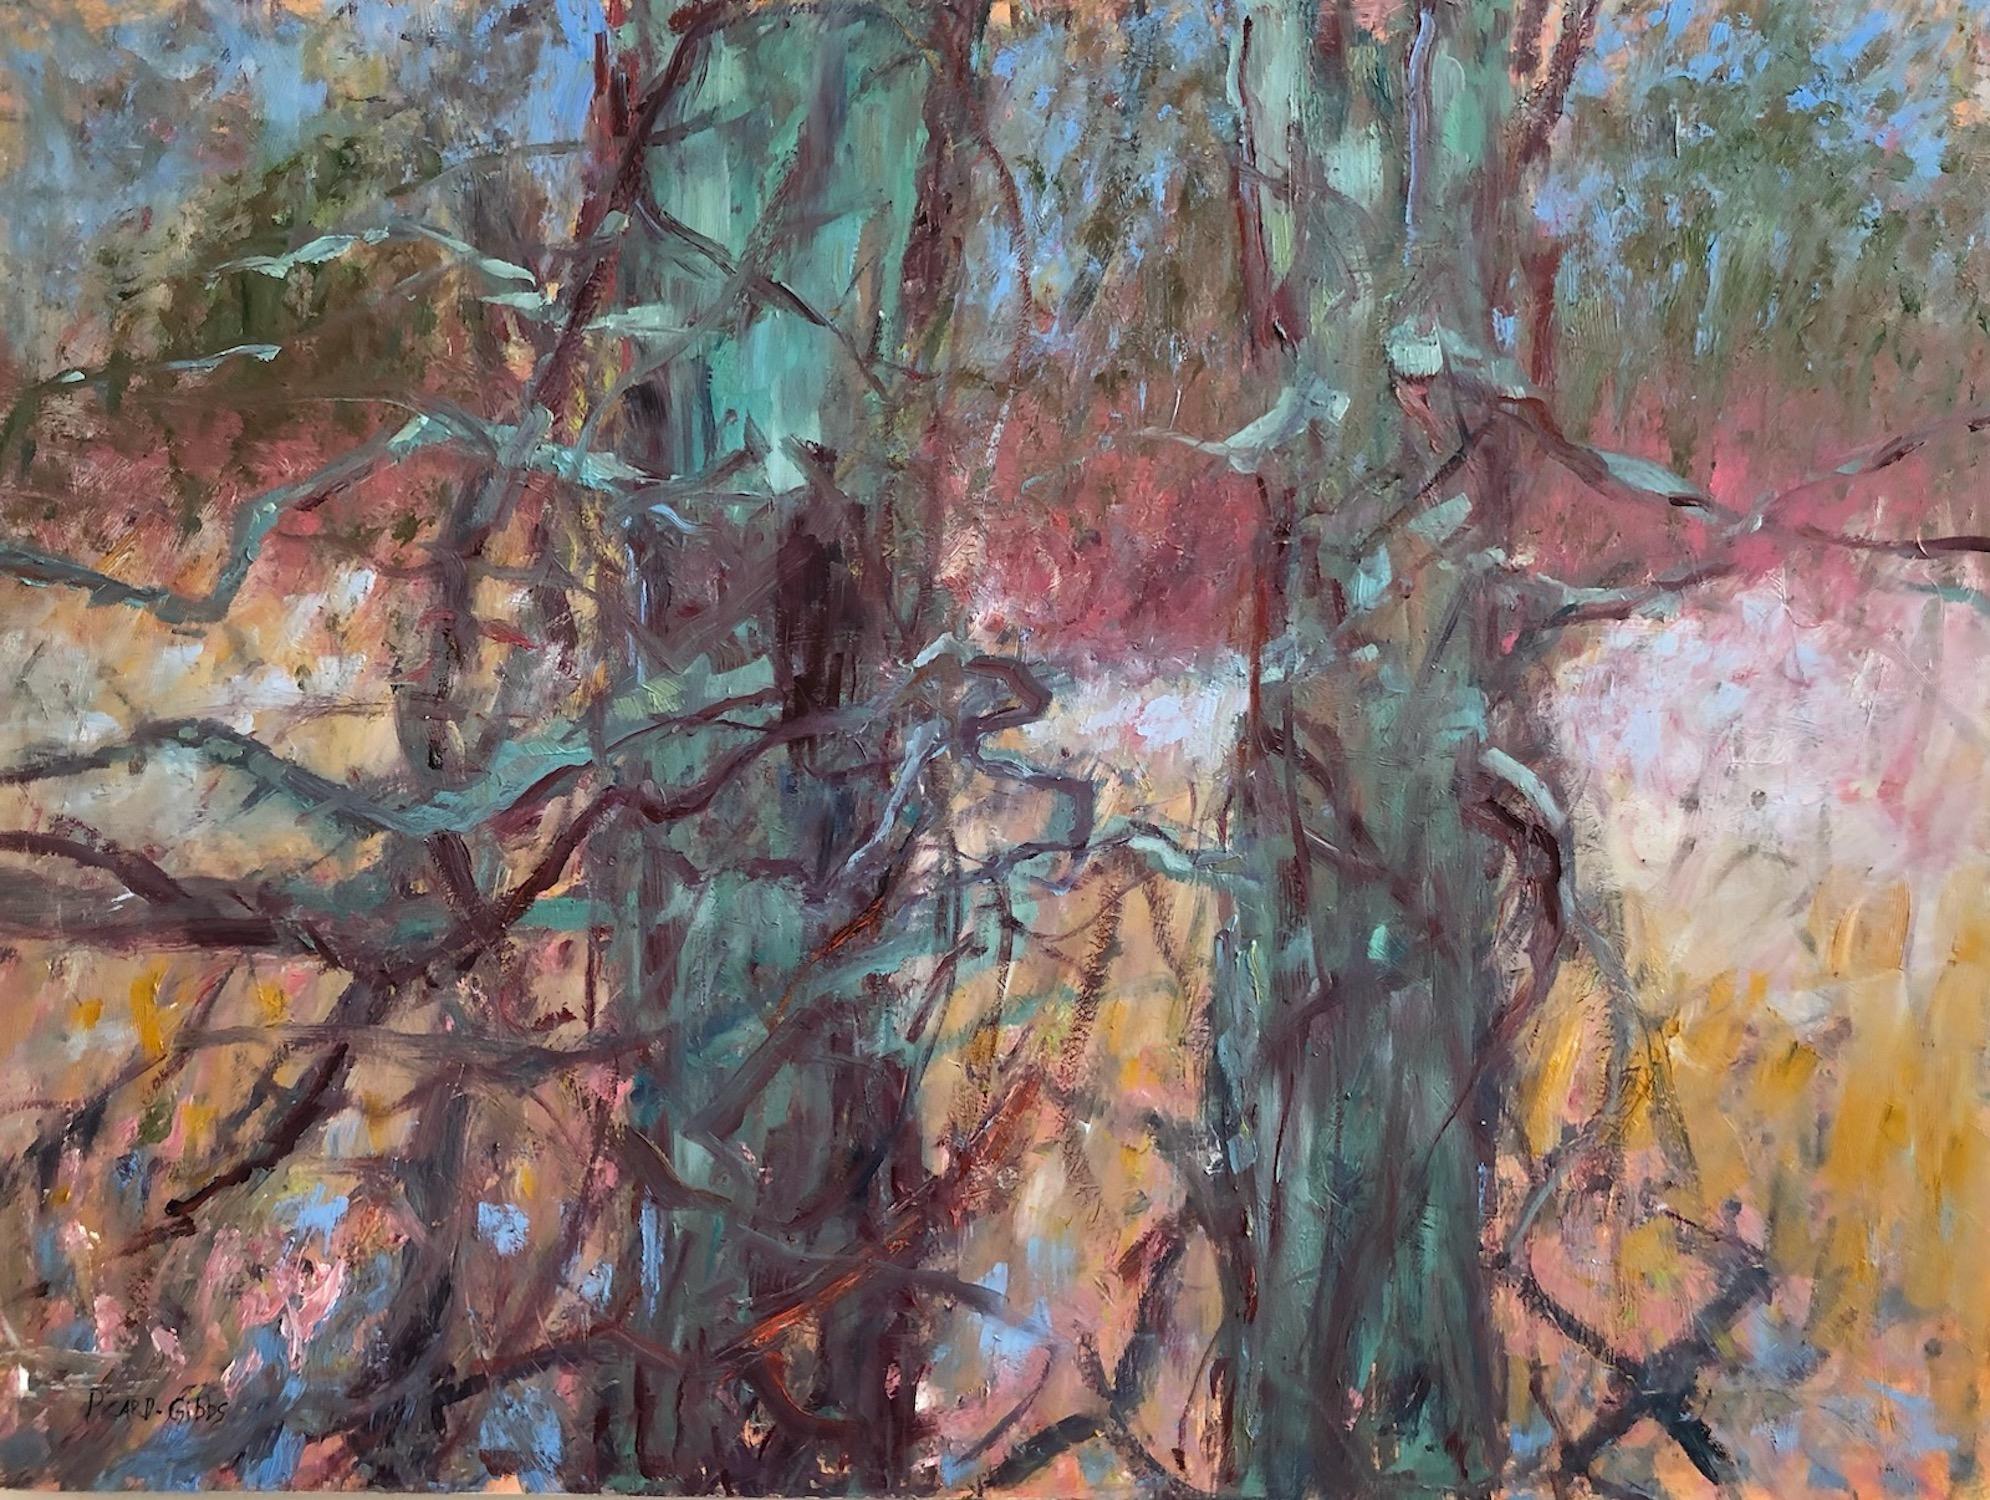 Catherine Picard-Gibbs Landscape Painting - "The Watchmen", contemporary, trees, yellow, blue, pink, green, oil painting